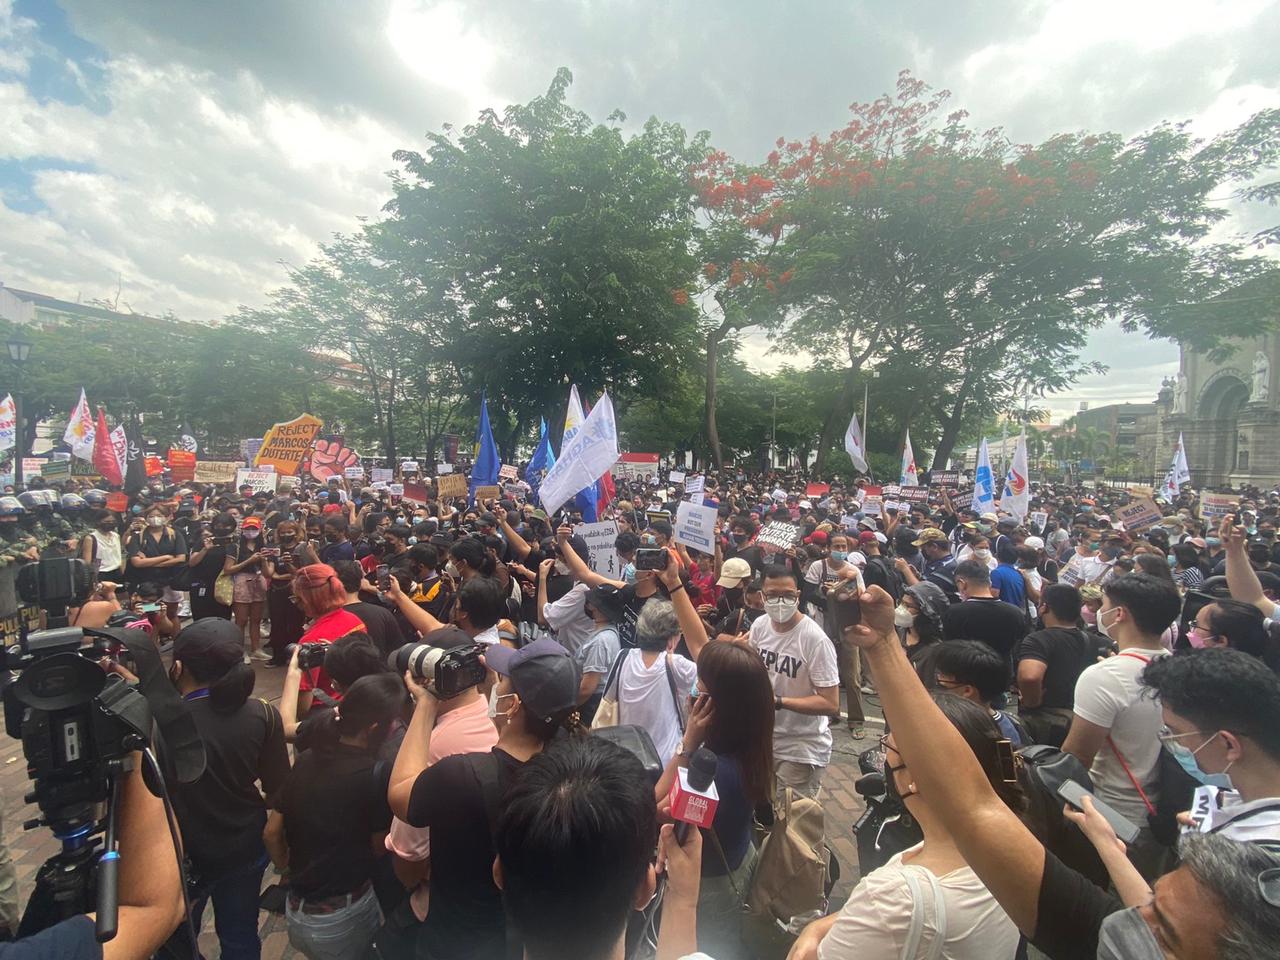 Around 400 people stage a protest near the main office of the Commission on Elections (Comelec) in Intramuros, Manila, on Tuesday, May 10, 2022